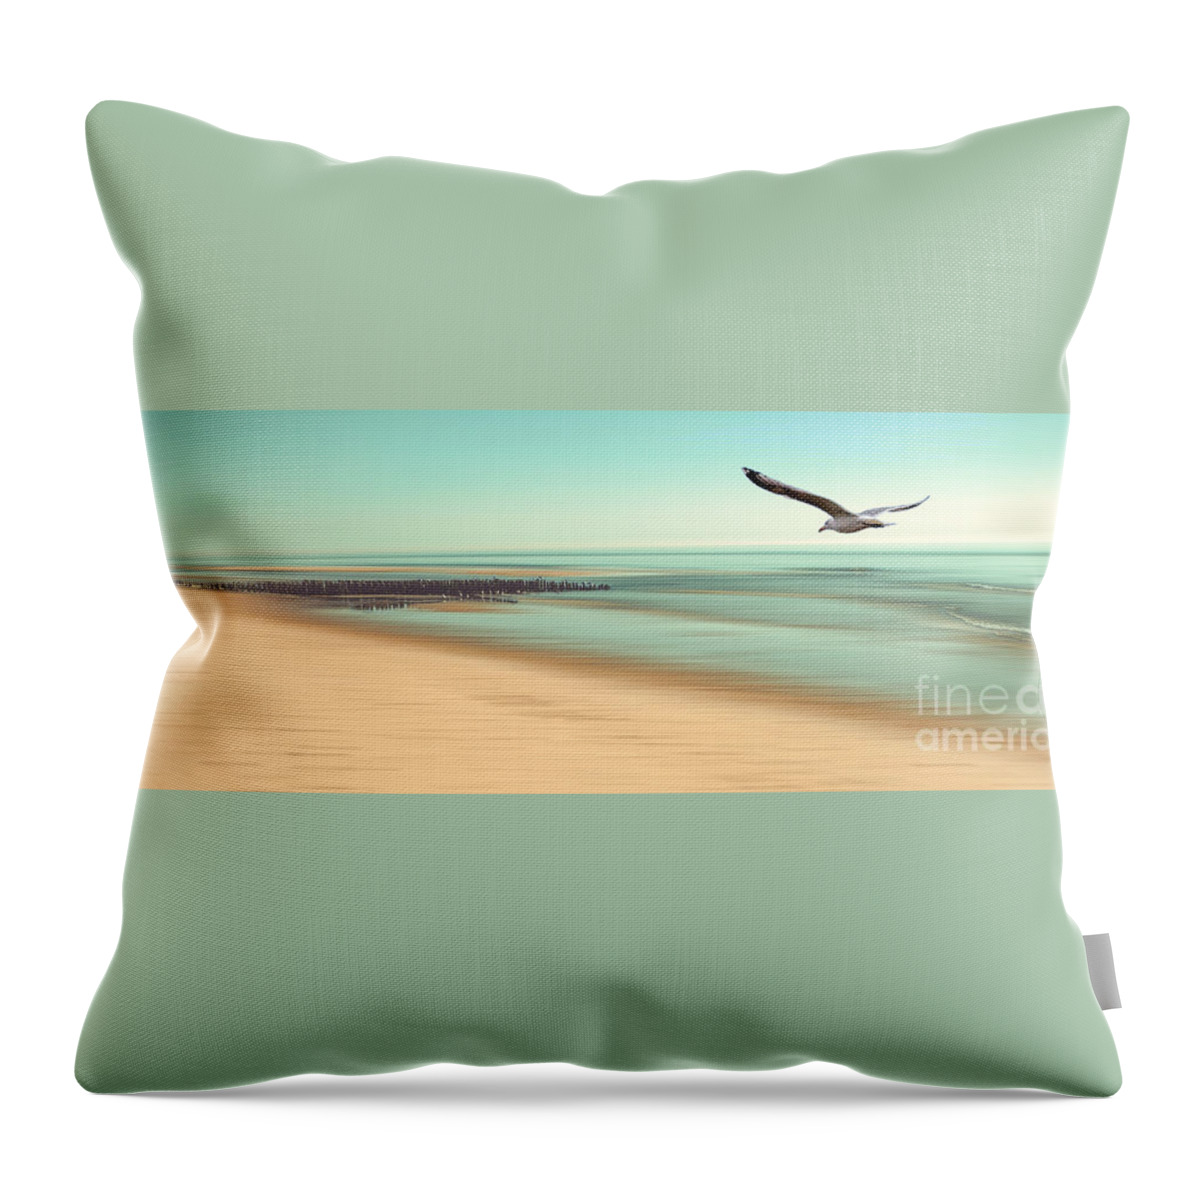 Peaceful Throw Pillow featuring the photograph Desire - Light by Hannes Cmarits